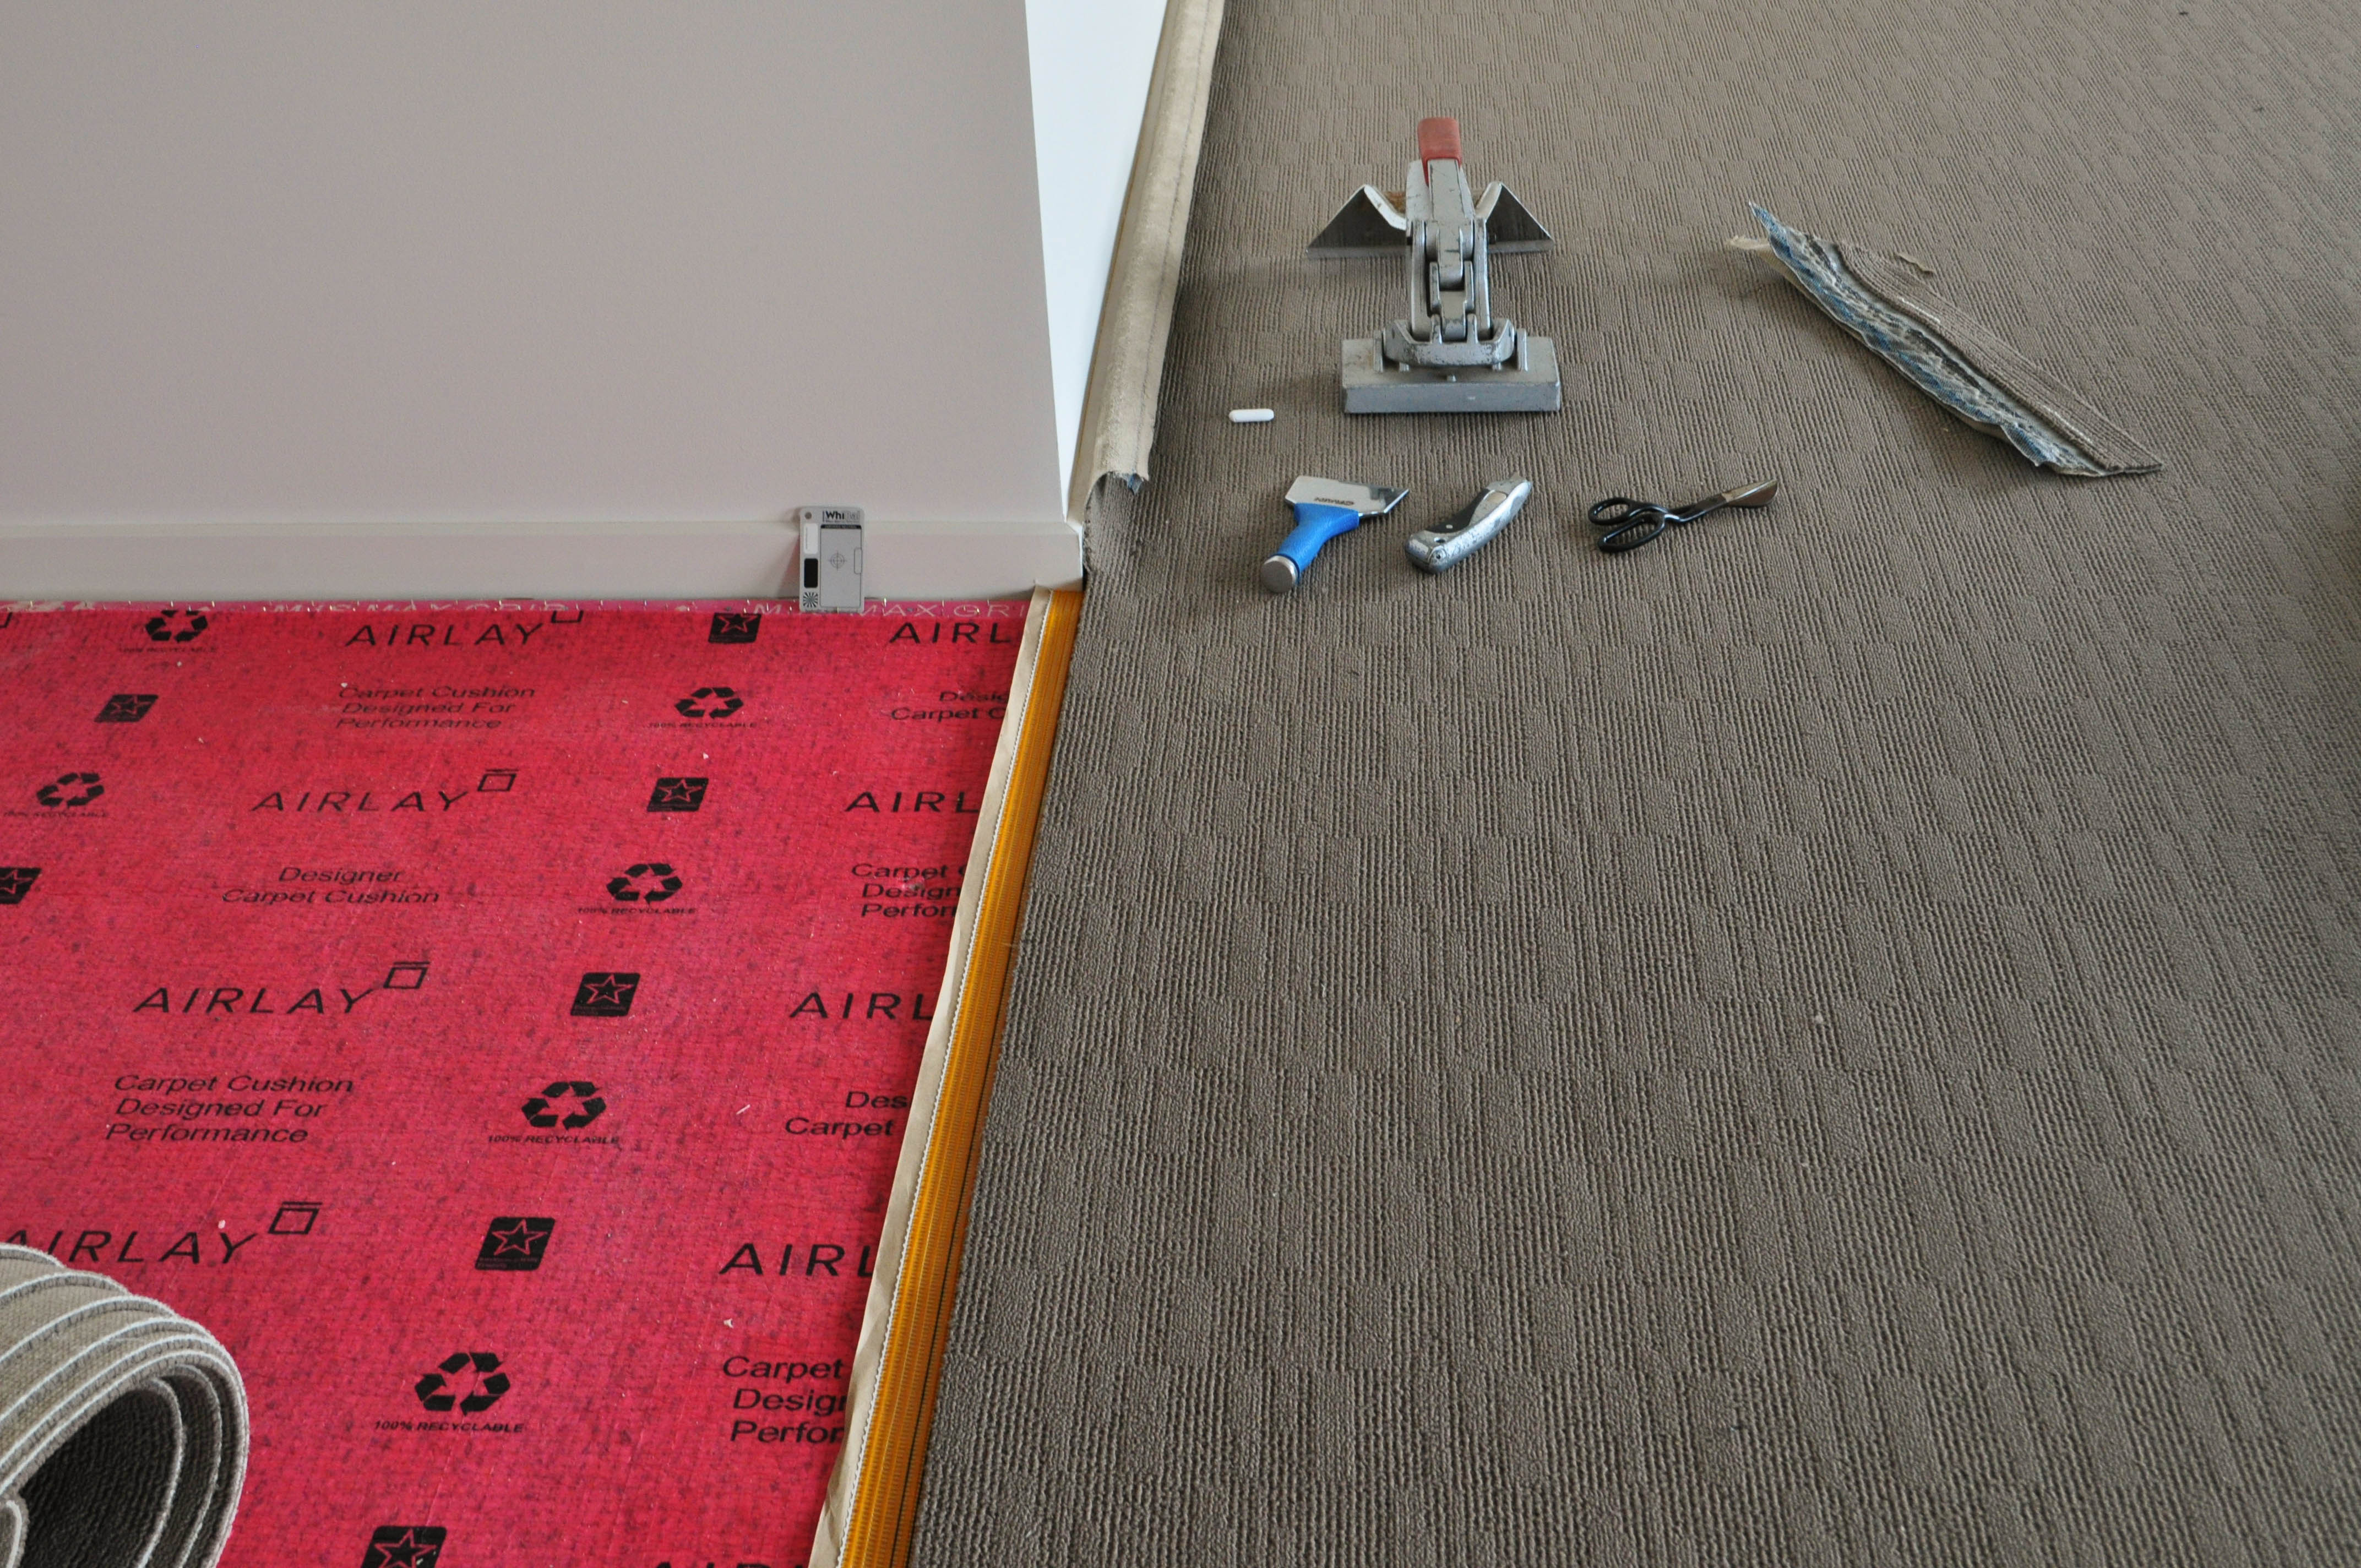 carpet laying process under way by Concord Floors, showing a roll of carpet stretched out and prepared for joining to other carpet roll
 , on top of installed red underlay in a home in Point Cook, Werribee.